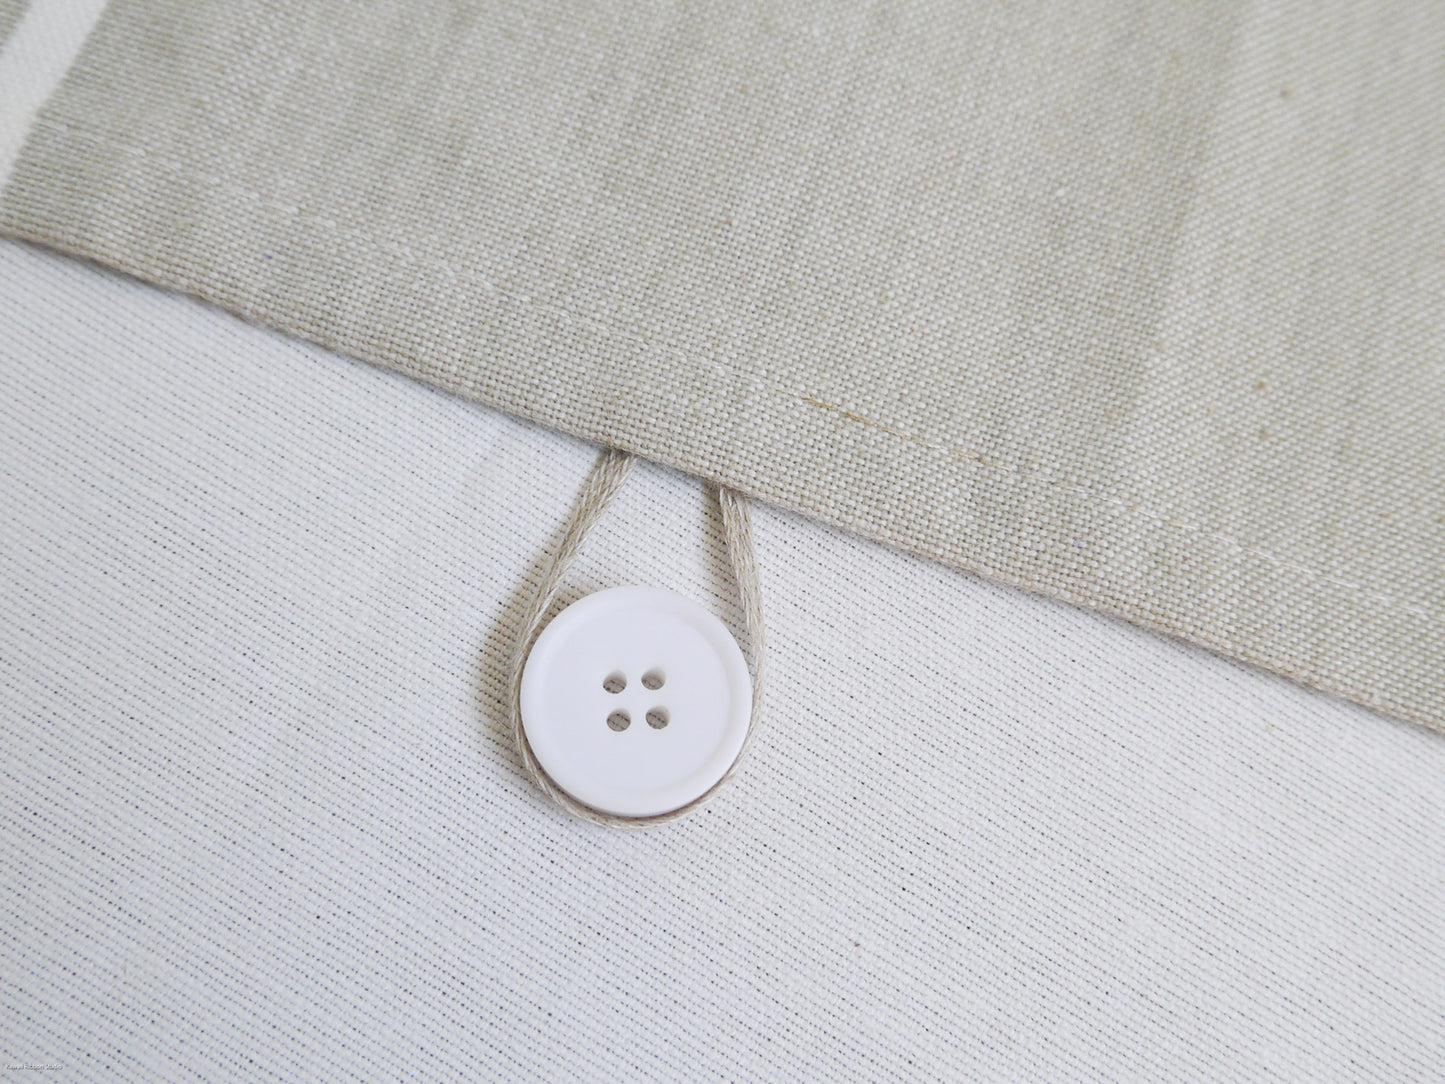 1mm, 3mm, 5mm flat cord in 100% washed linen